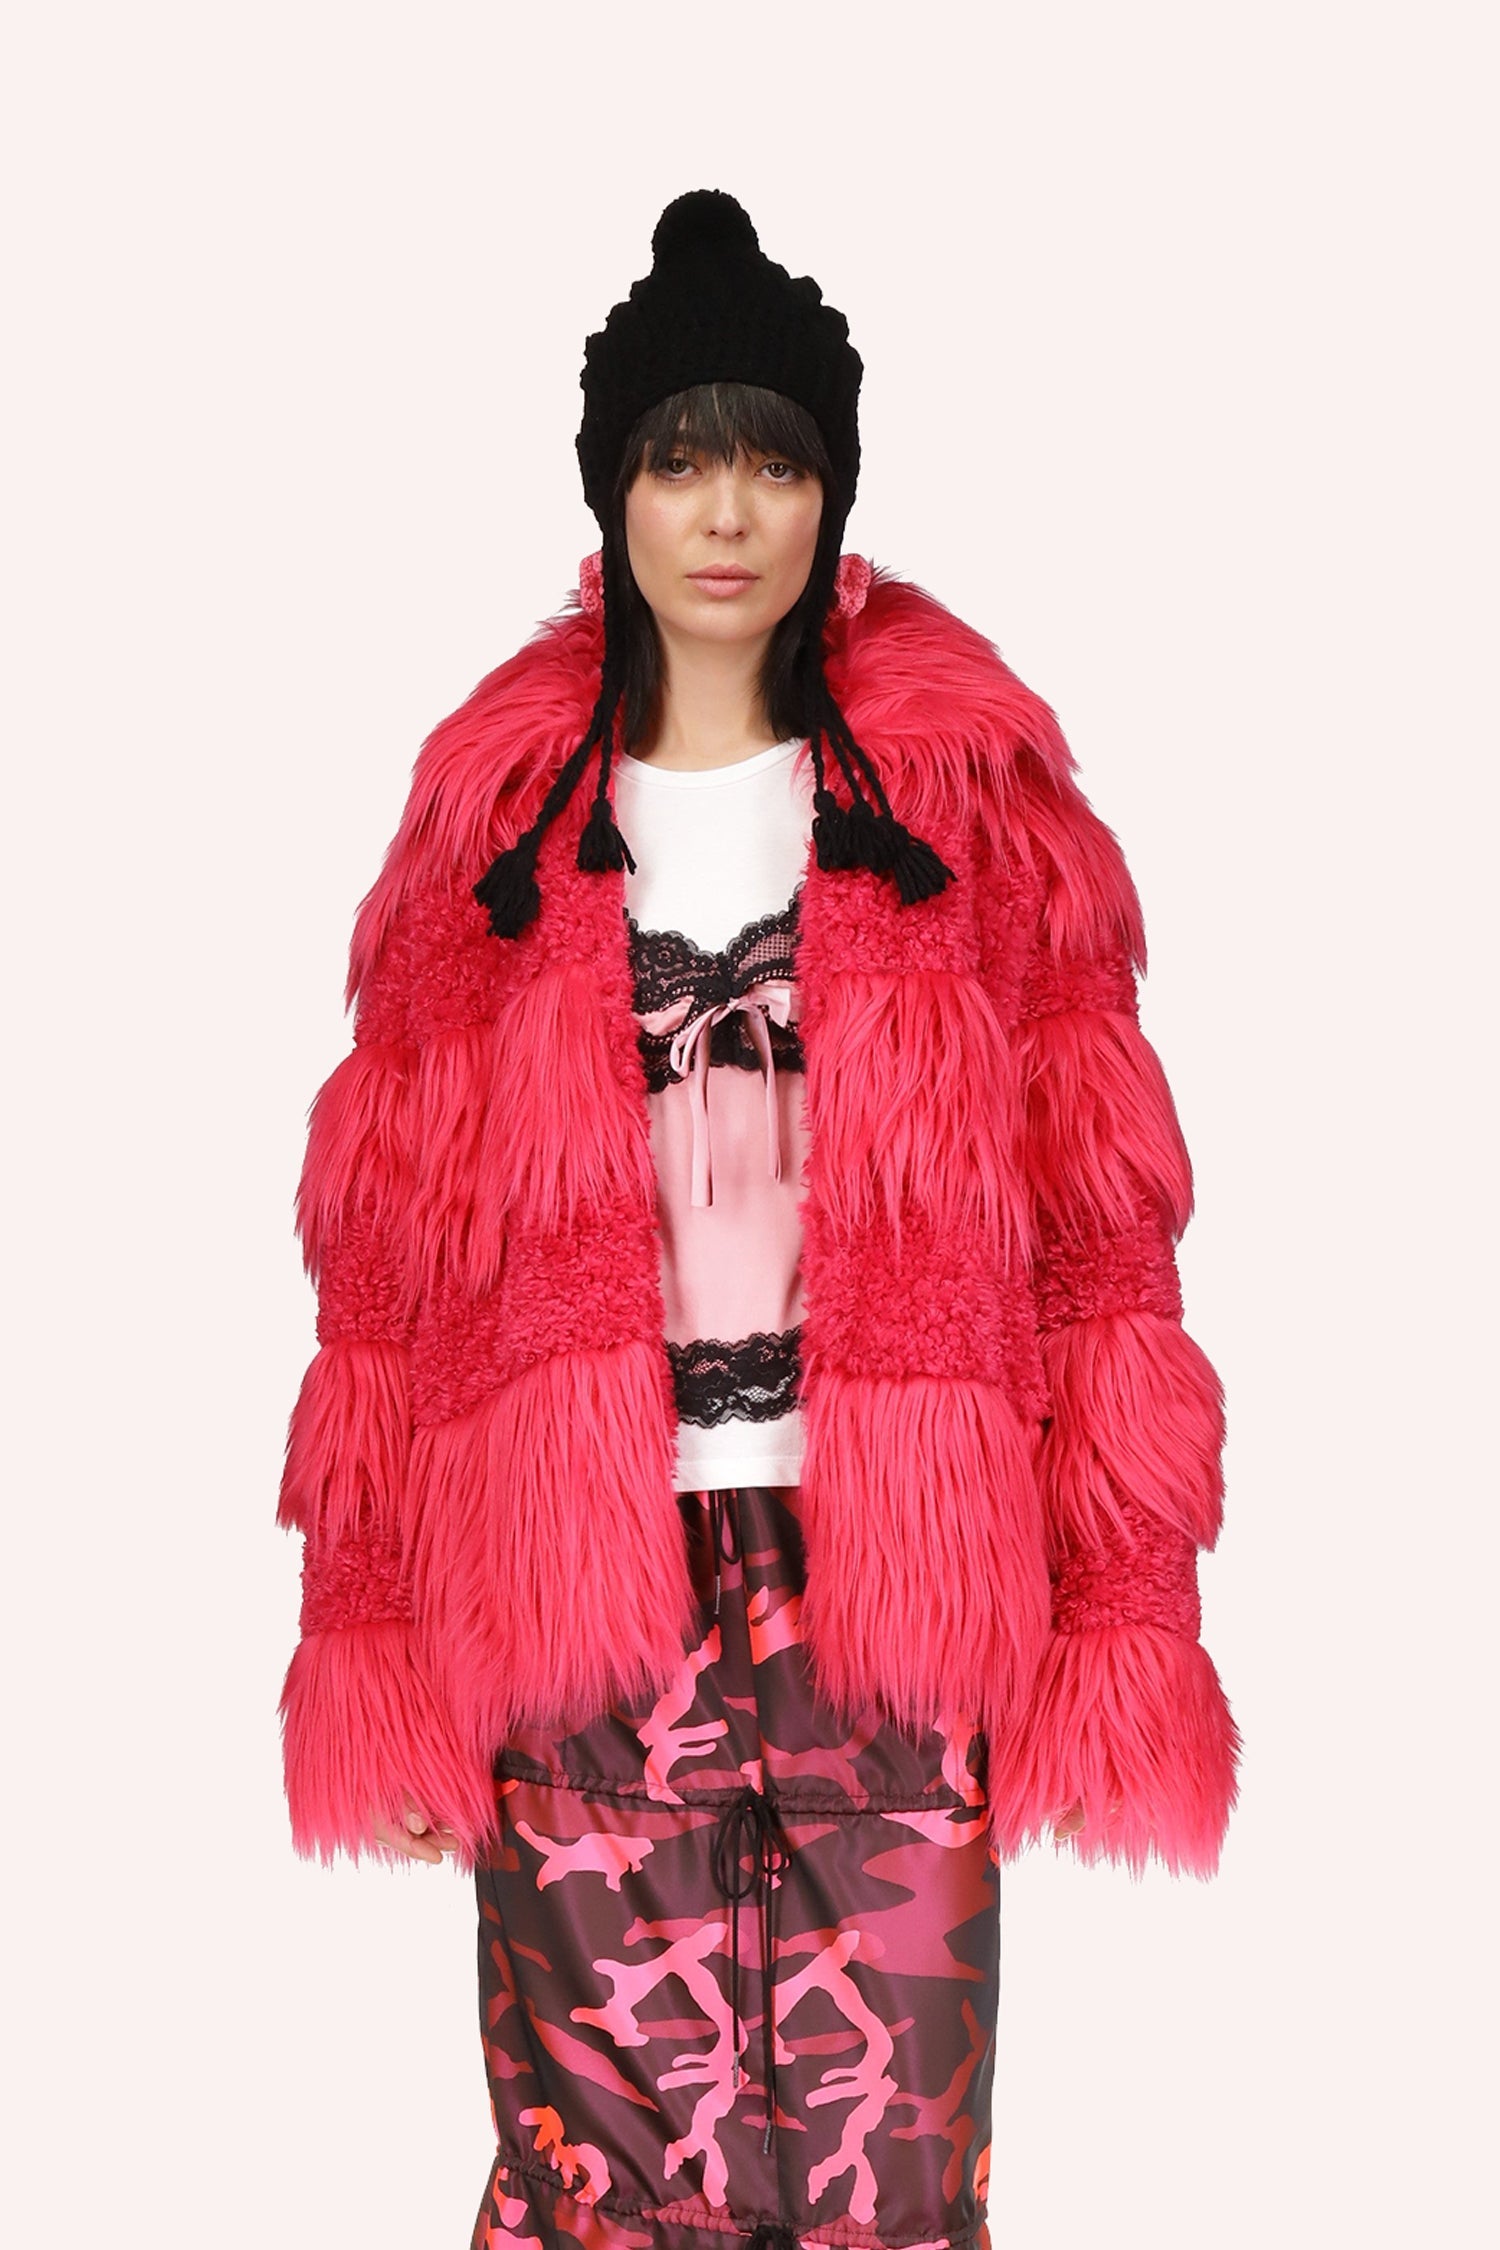 Jacket Pink, long sleeve overs hands, hips long, fluffy pink material, 3-layers material, looks comfy